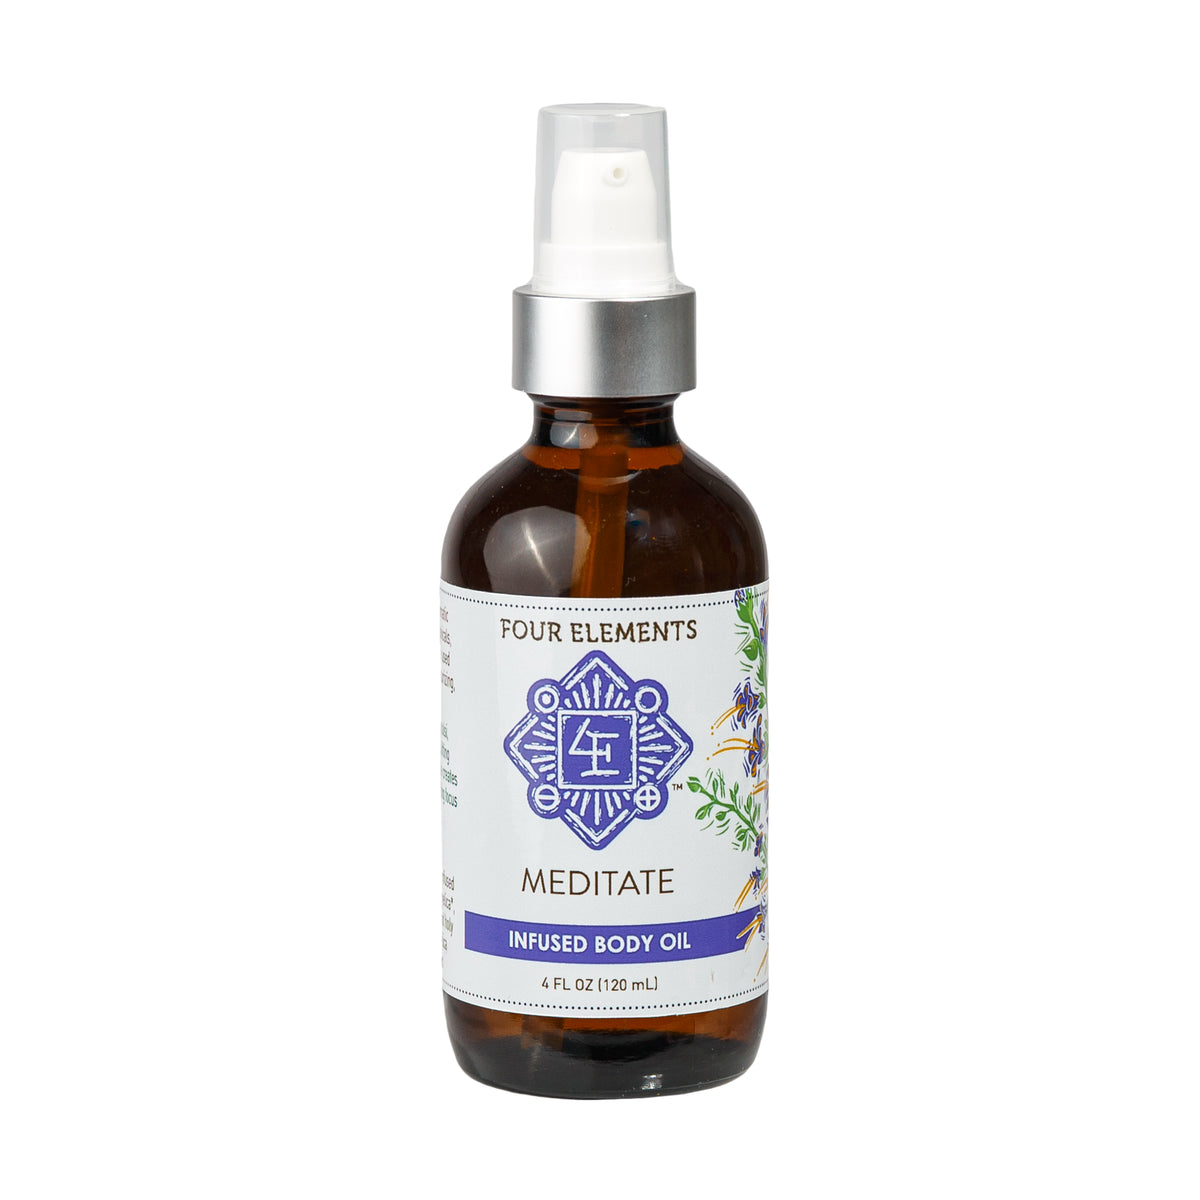 Primary Image of Meditate Body Oil